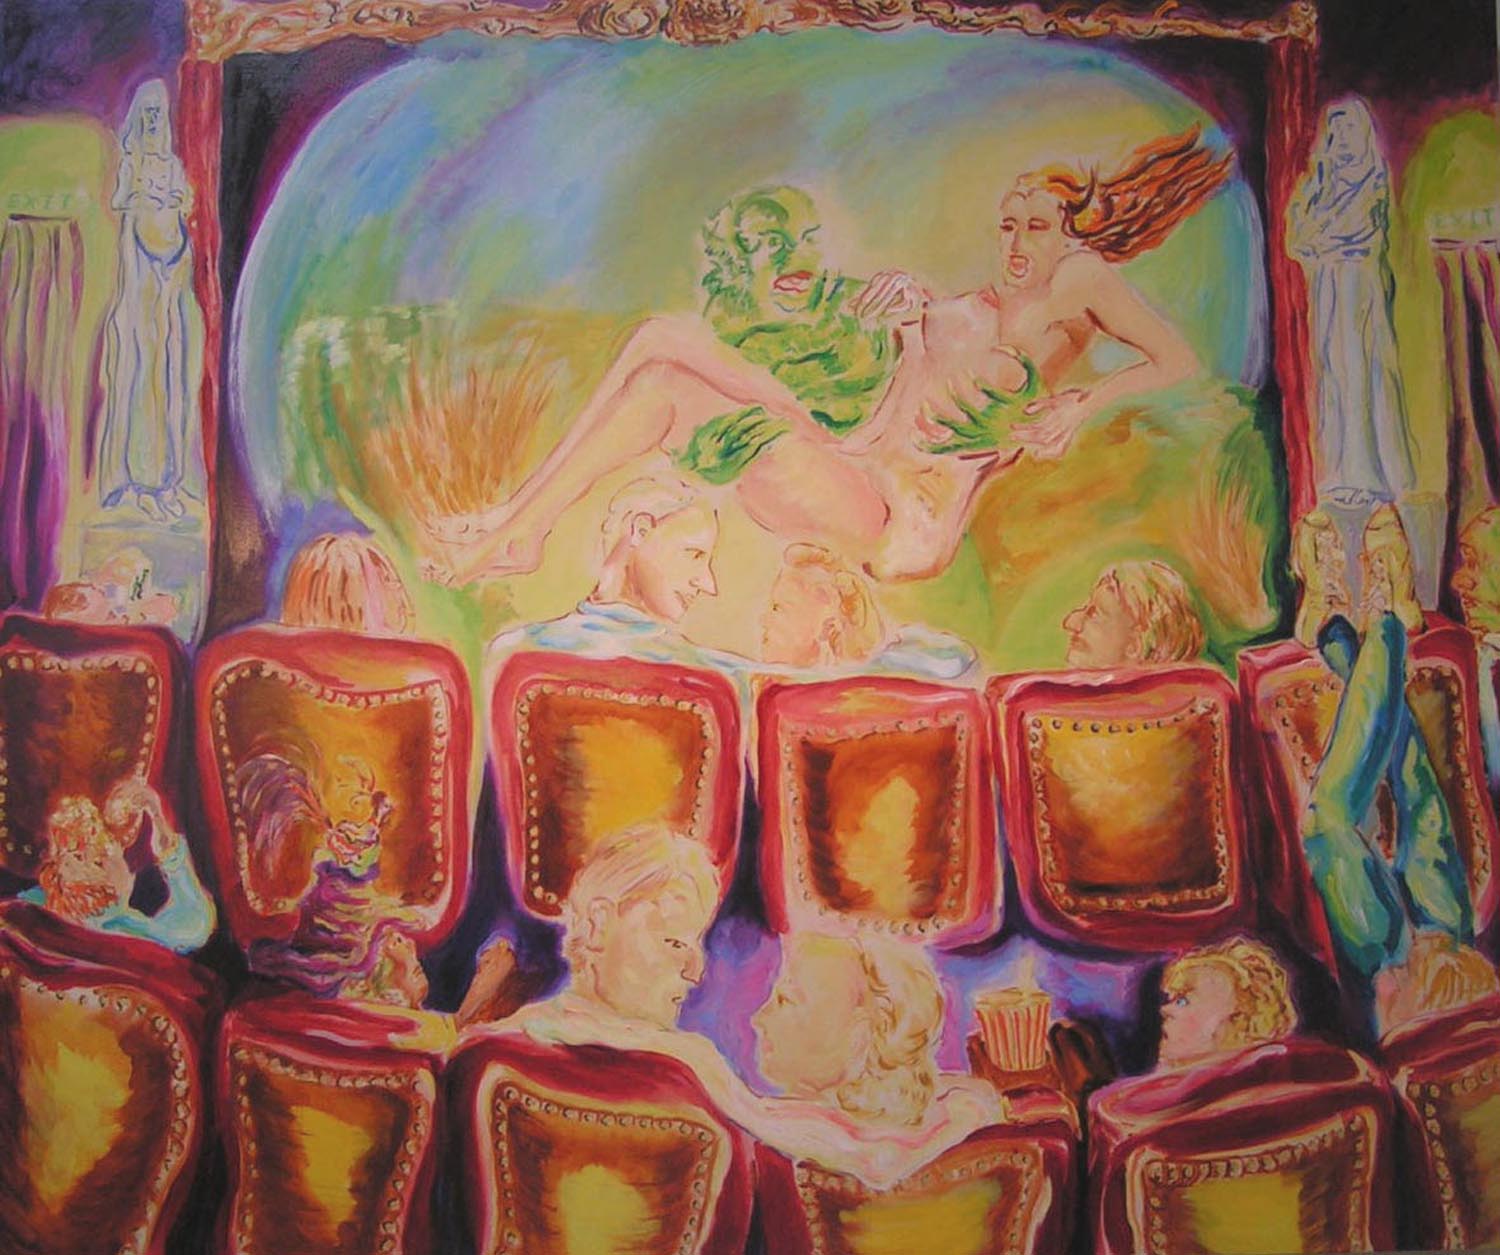 Double Feature, oil on canvas, 60” x 72”, 2005